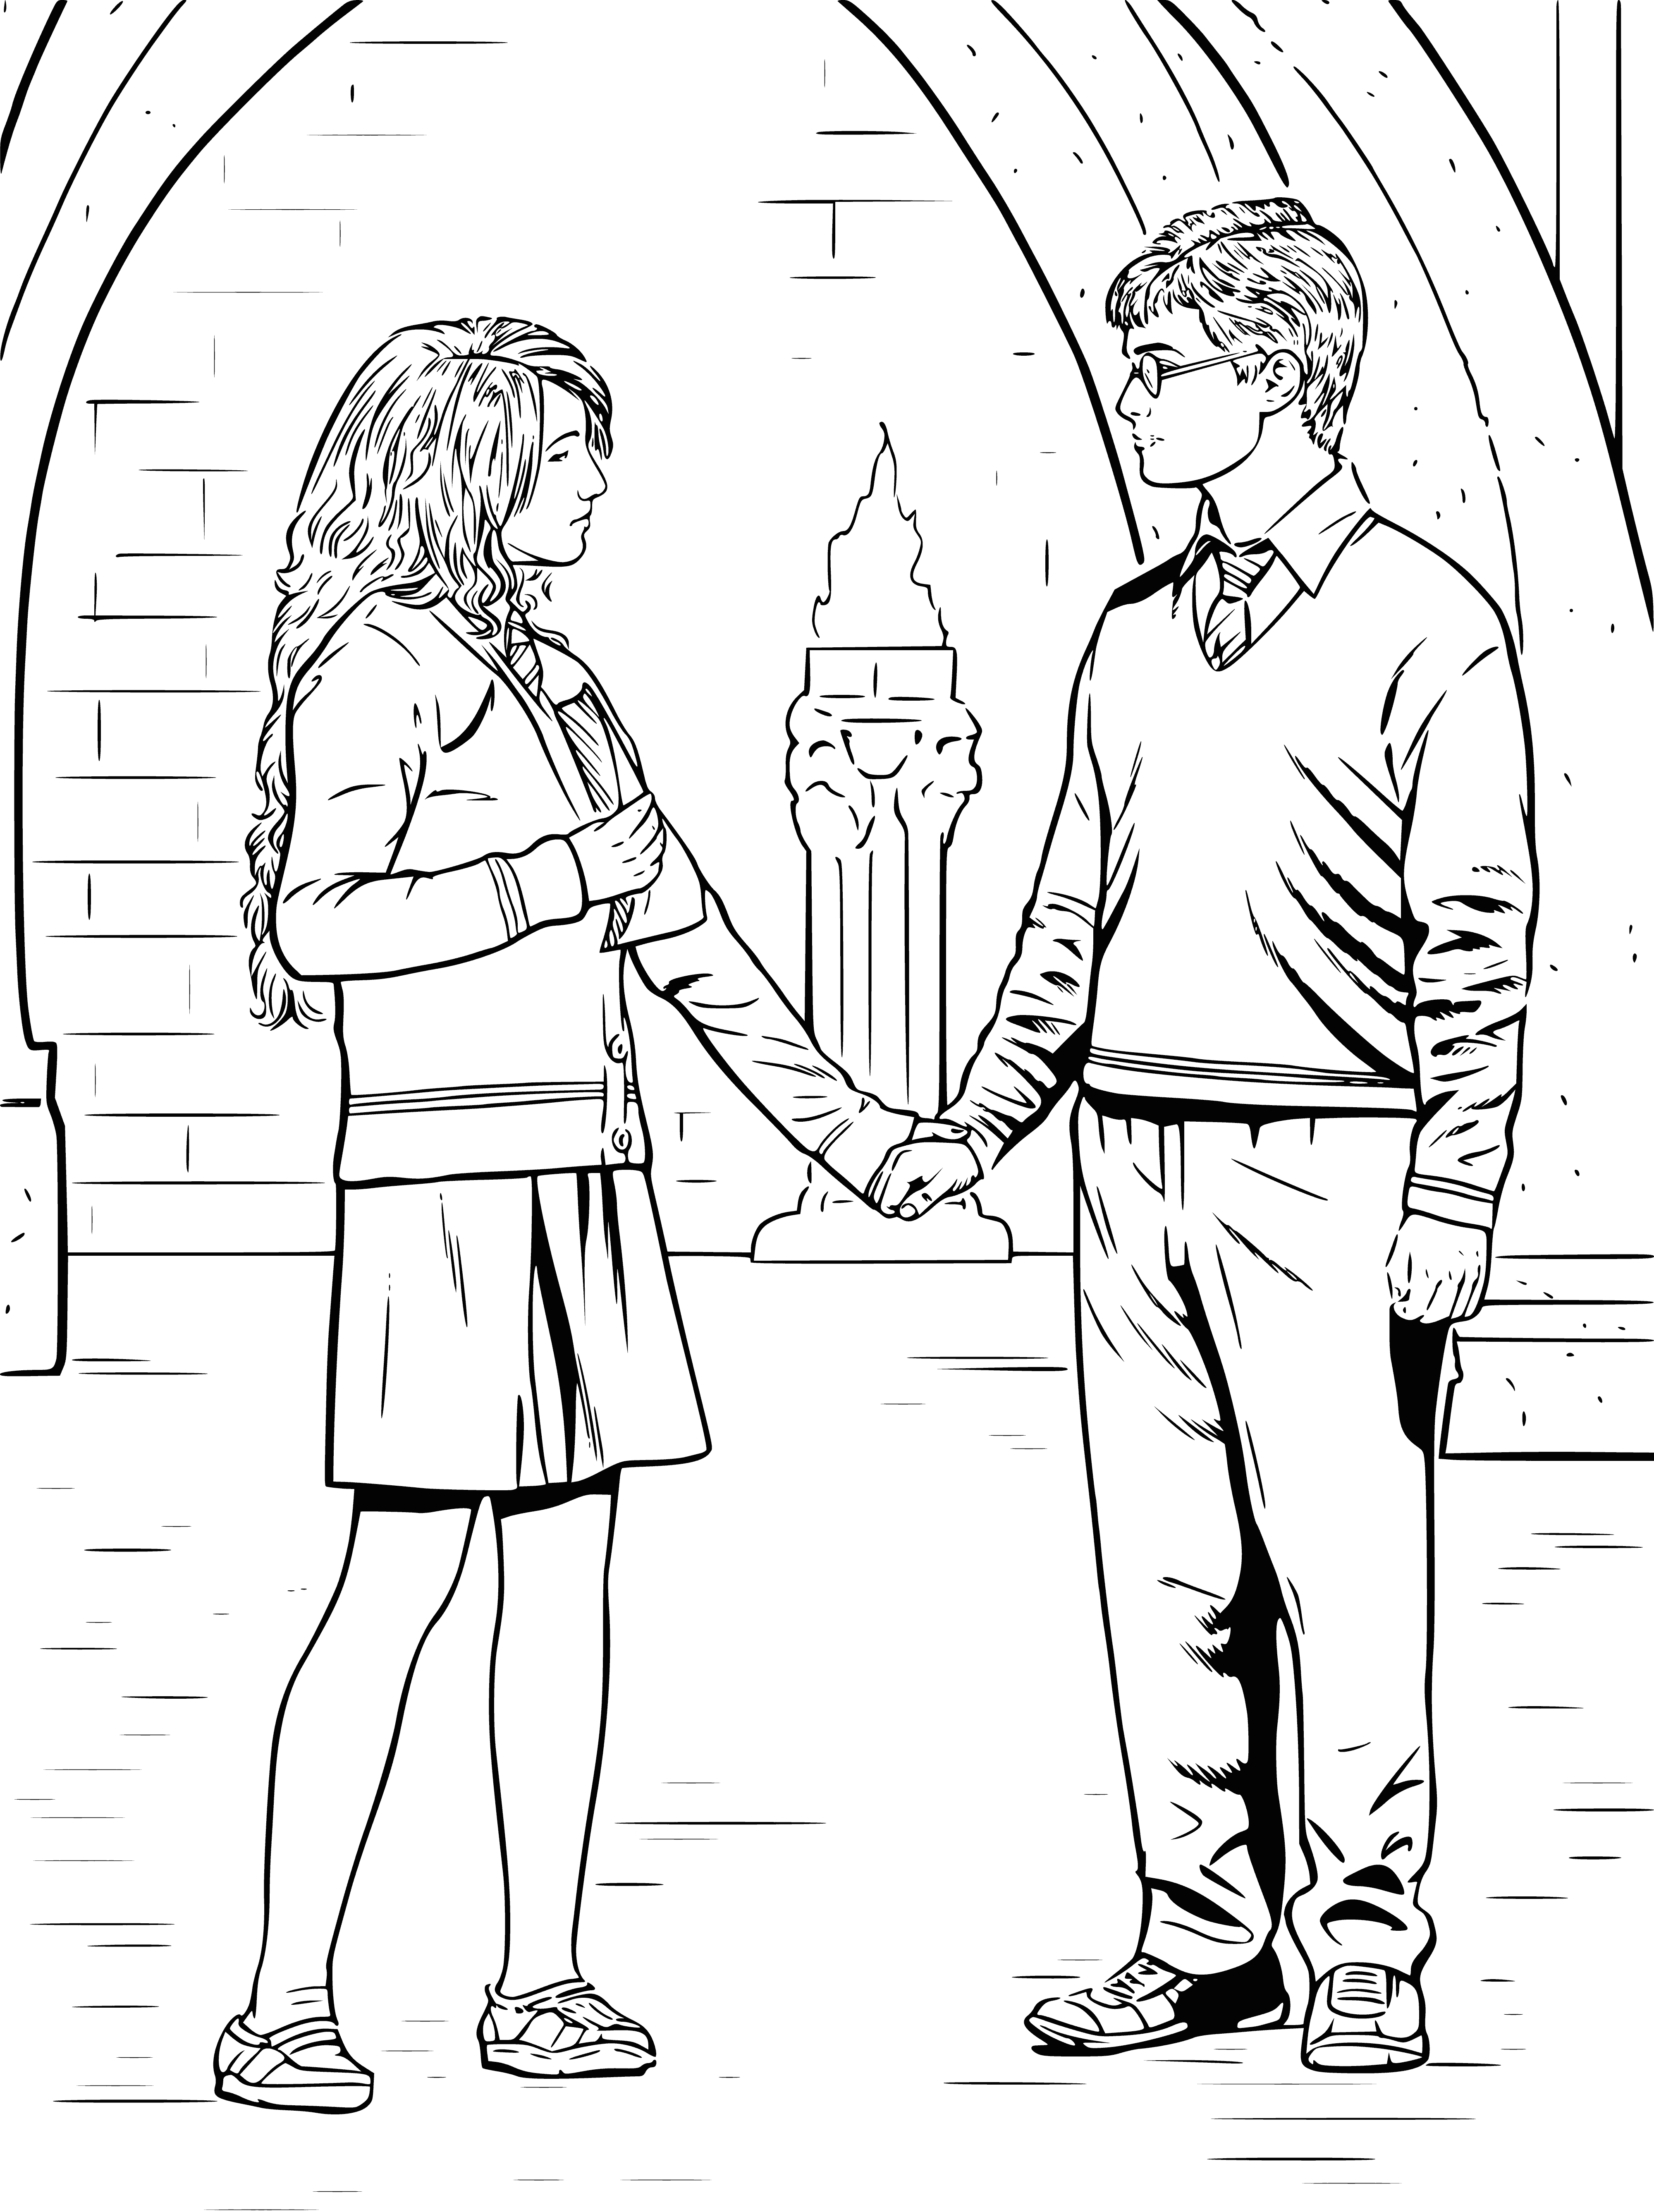 Harry Potter and Luna Lovegood coloring page